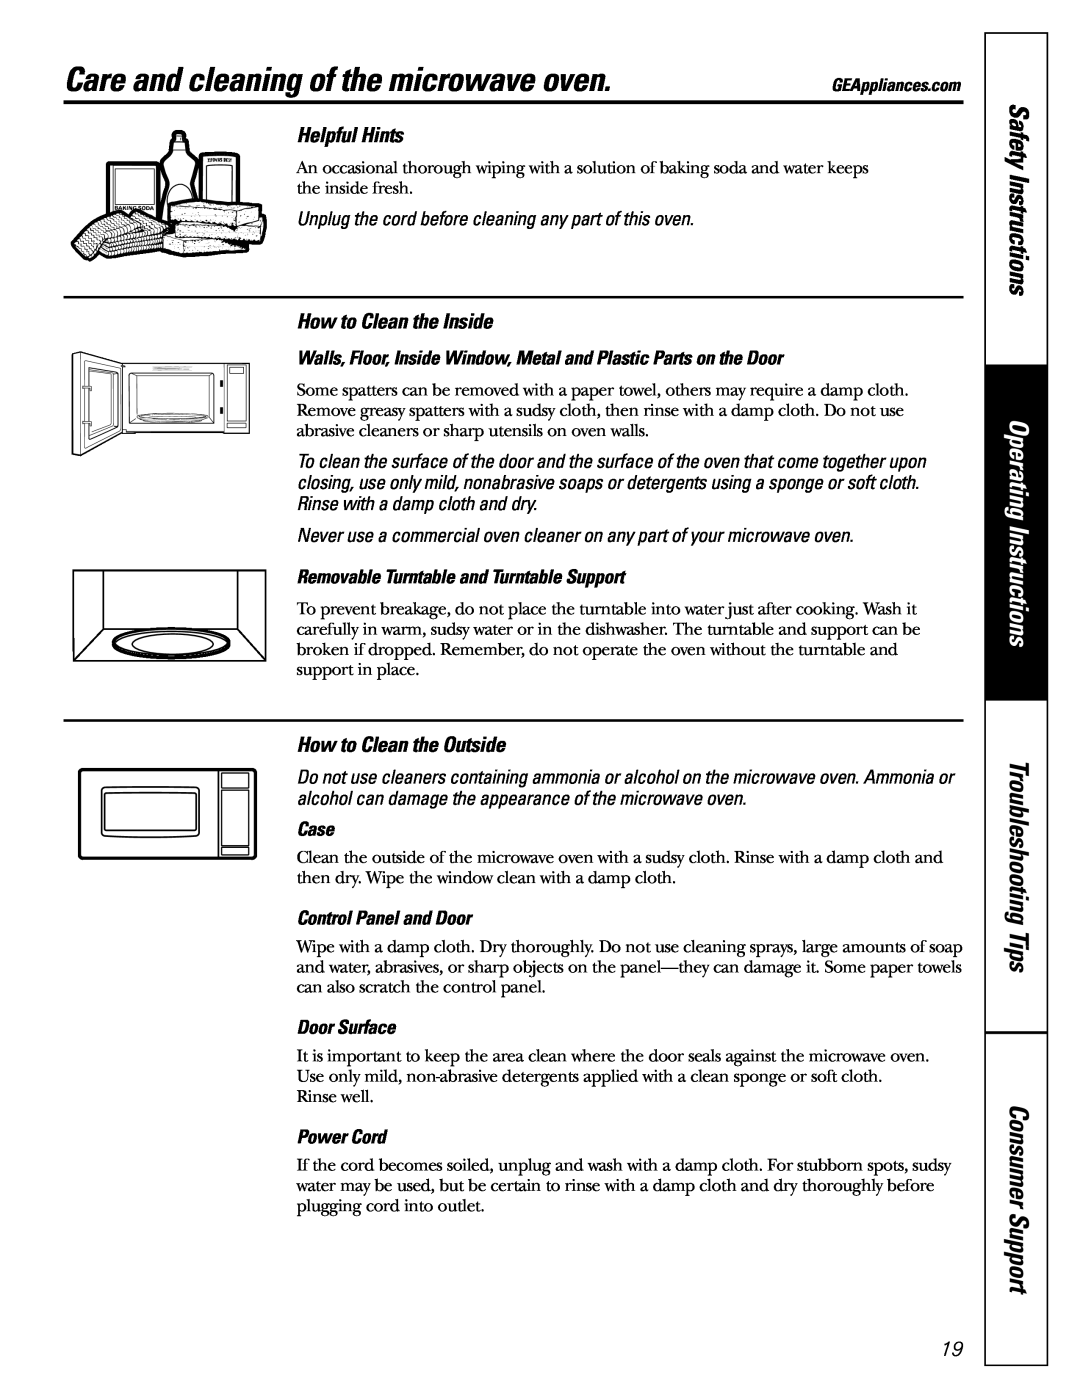 GE JE1160 Care and cleaning of the microwave oven, Safety Instructions, Operating Instructions, Case, Door Surface 